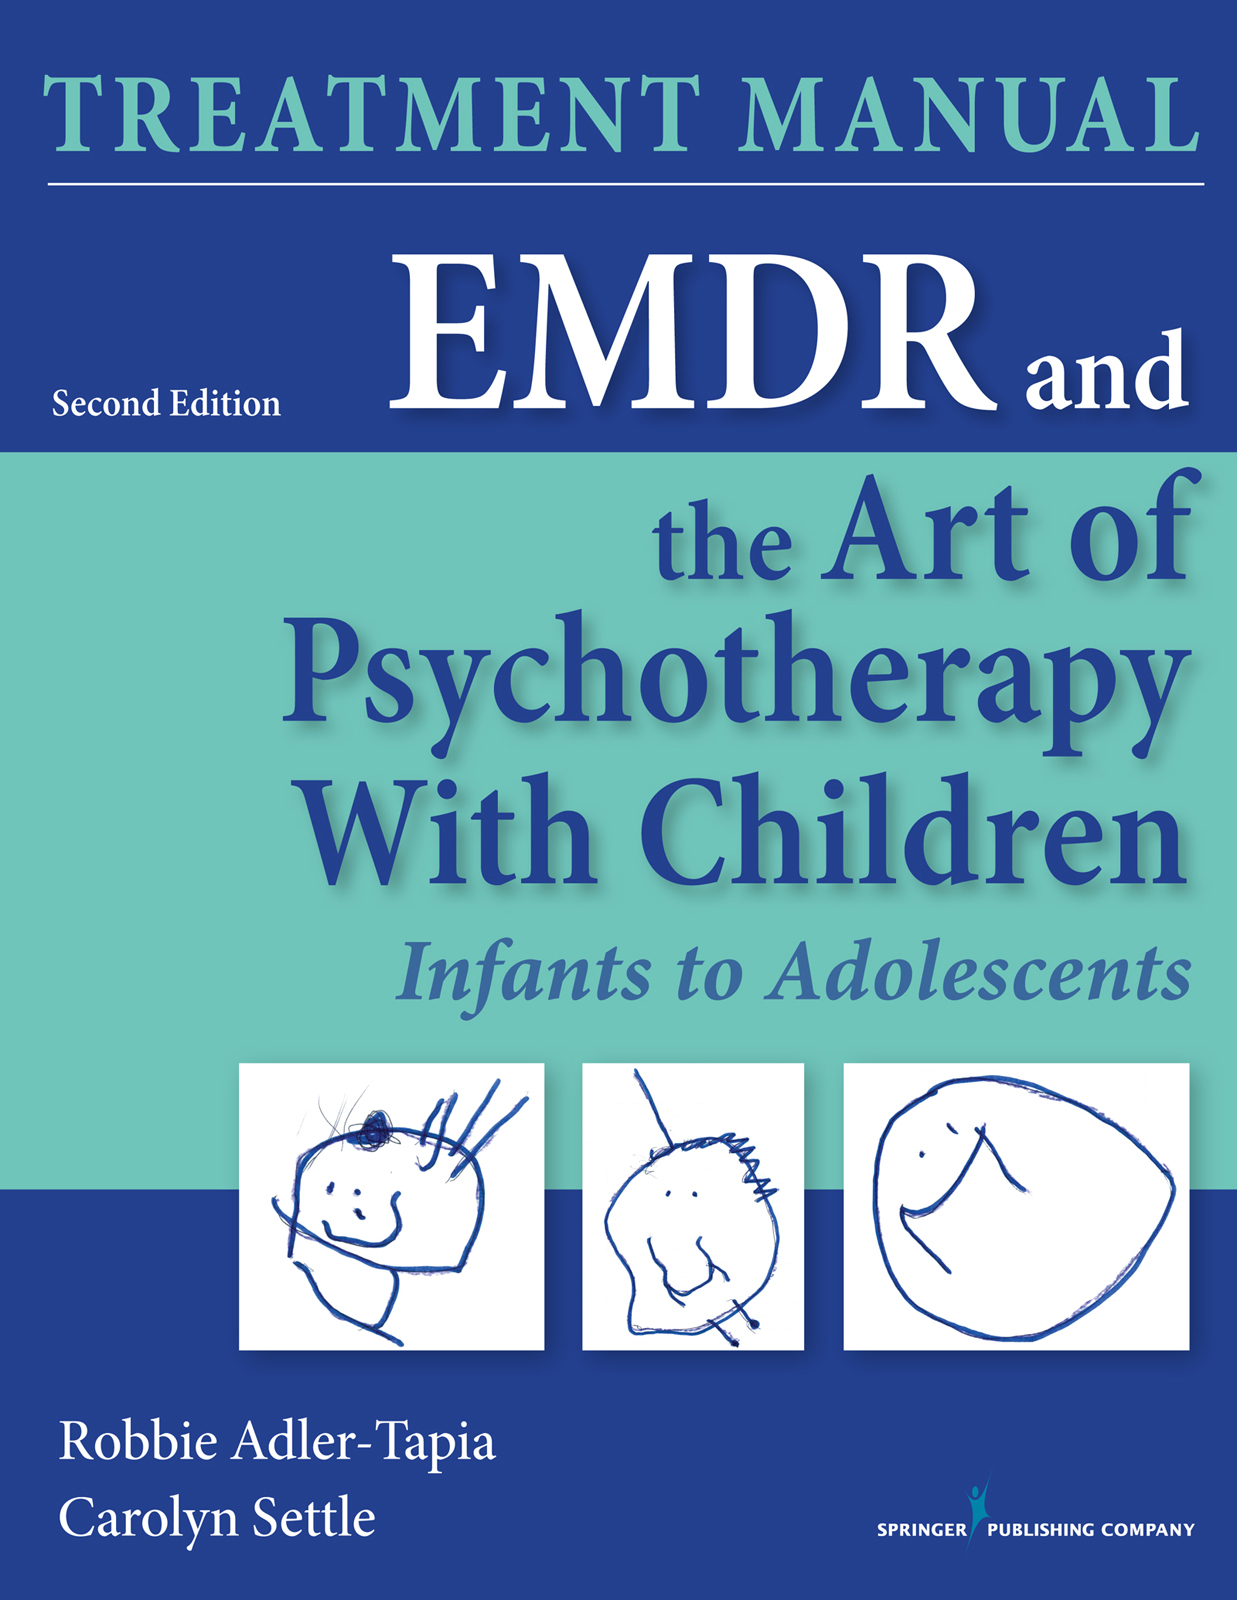 future-template-for-use-in-emdr-therapy-with-children-and-adolescents-springer-publishing